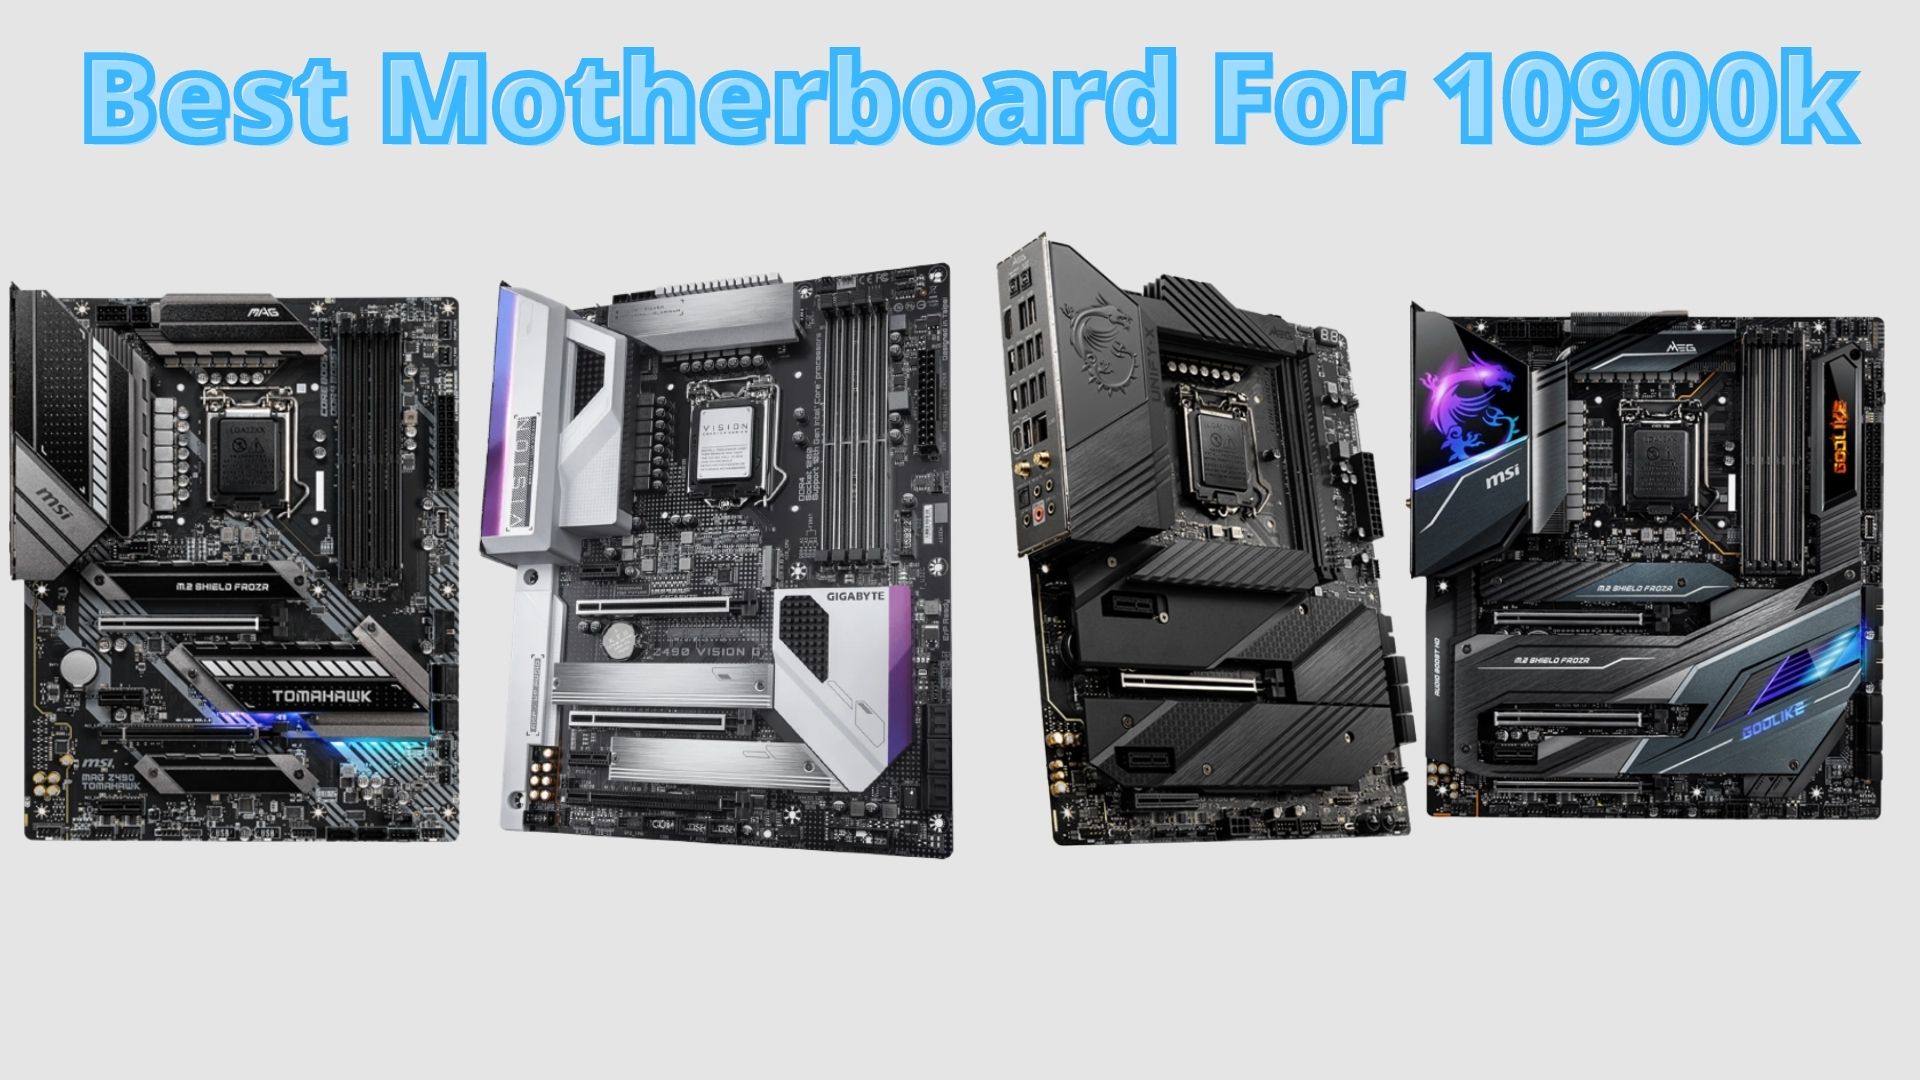 BEST Motherboard For i9-10900k: Budget, ITX, Gaming - Tech4Gamers